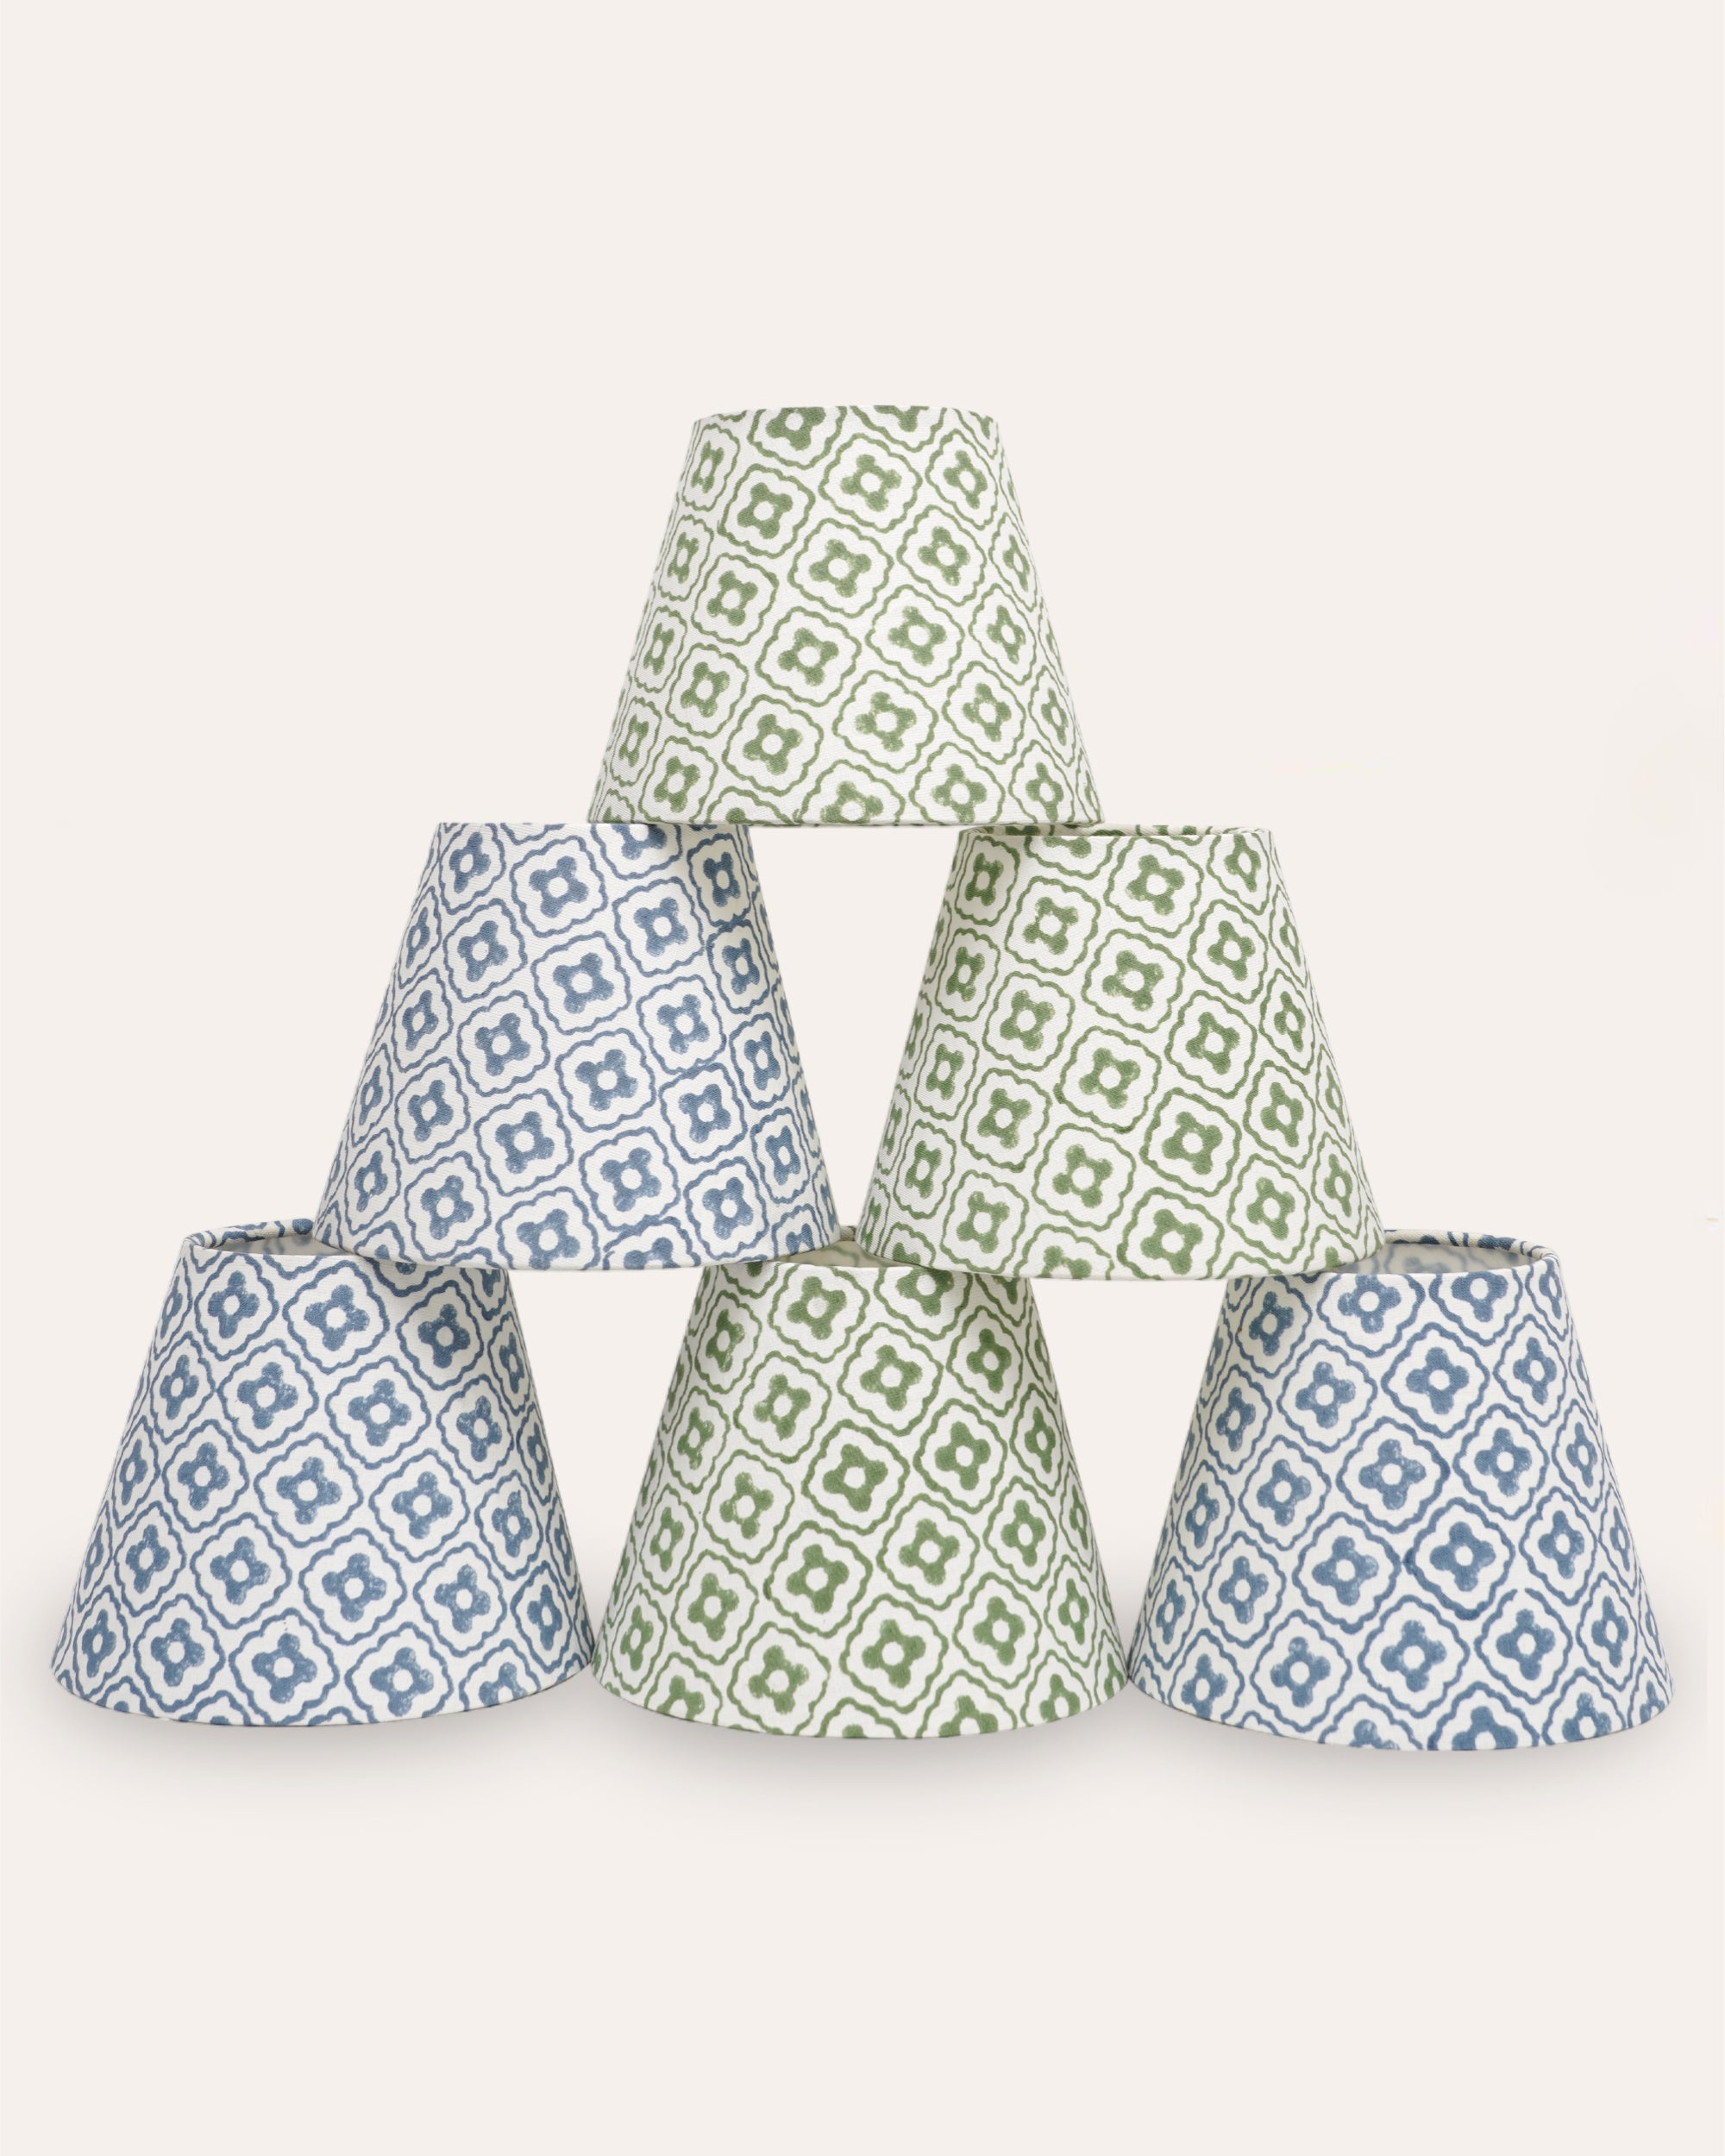 Finestra Candle Shade - Green